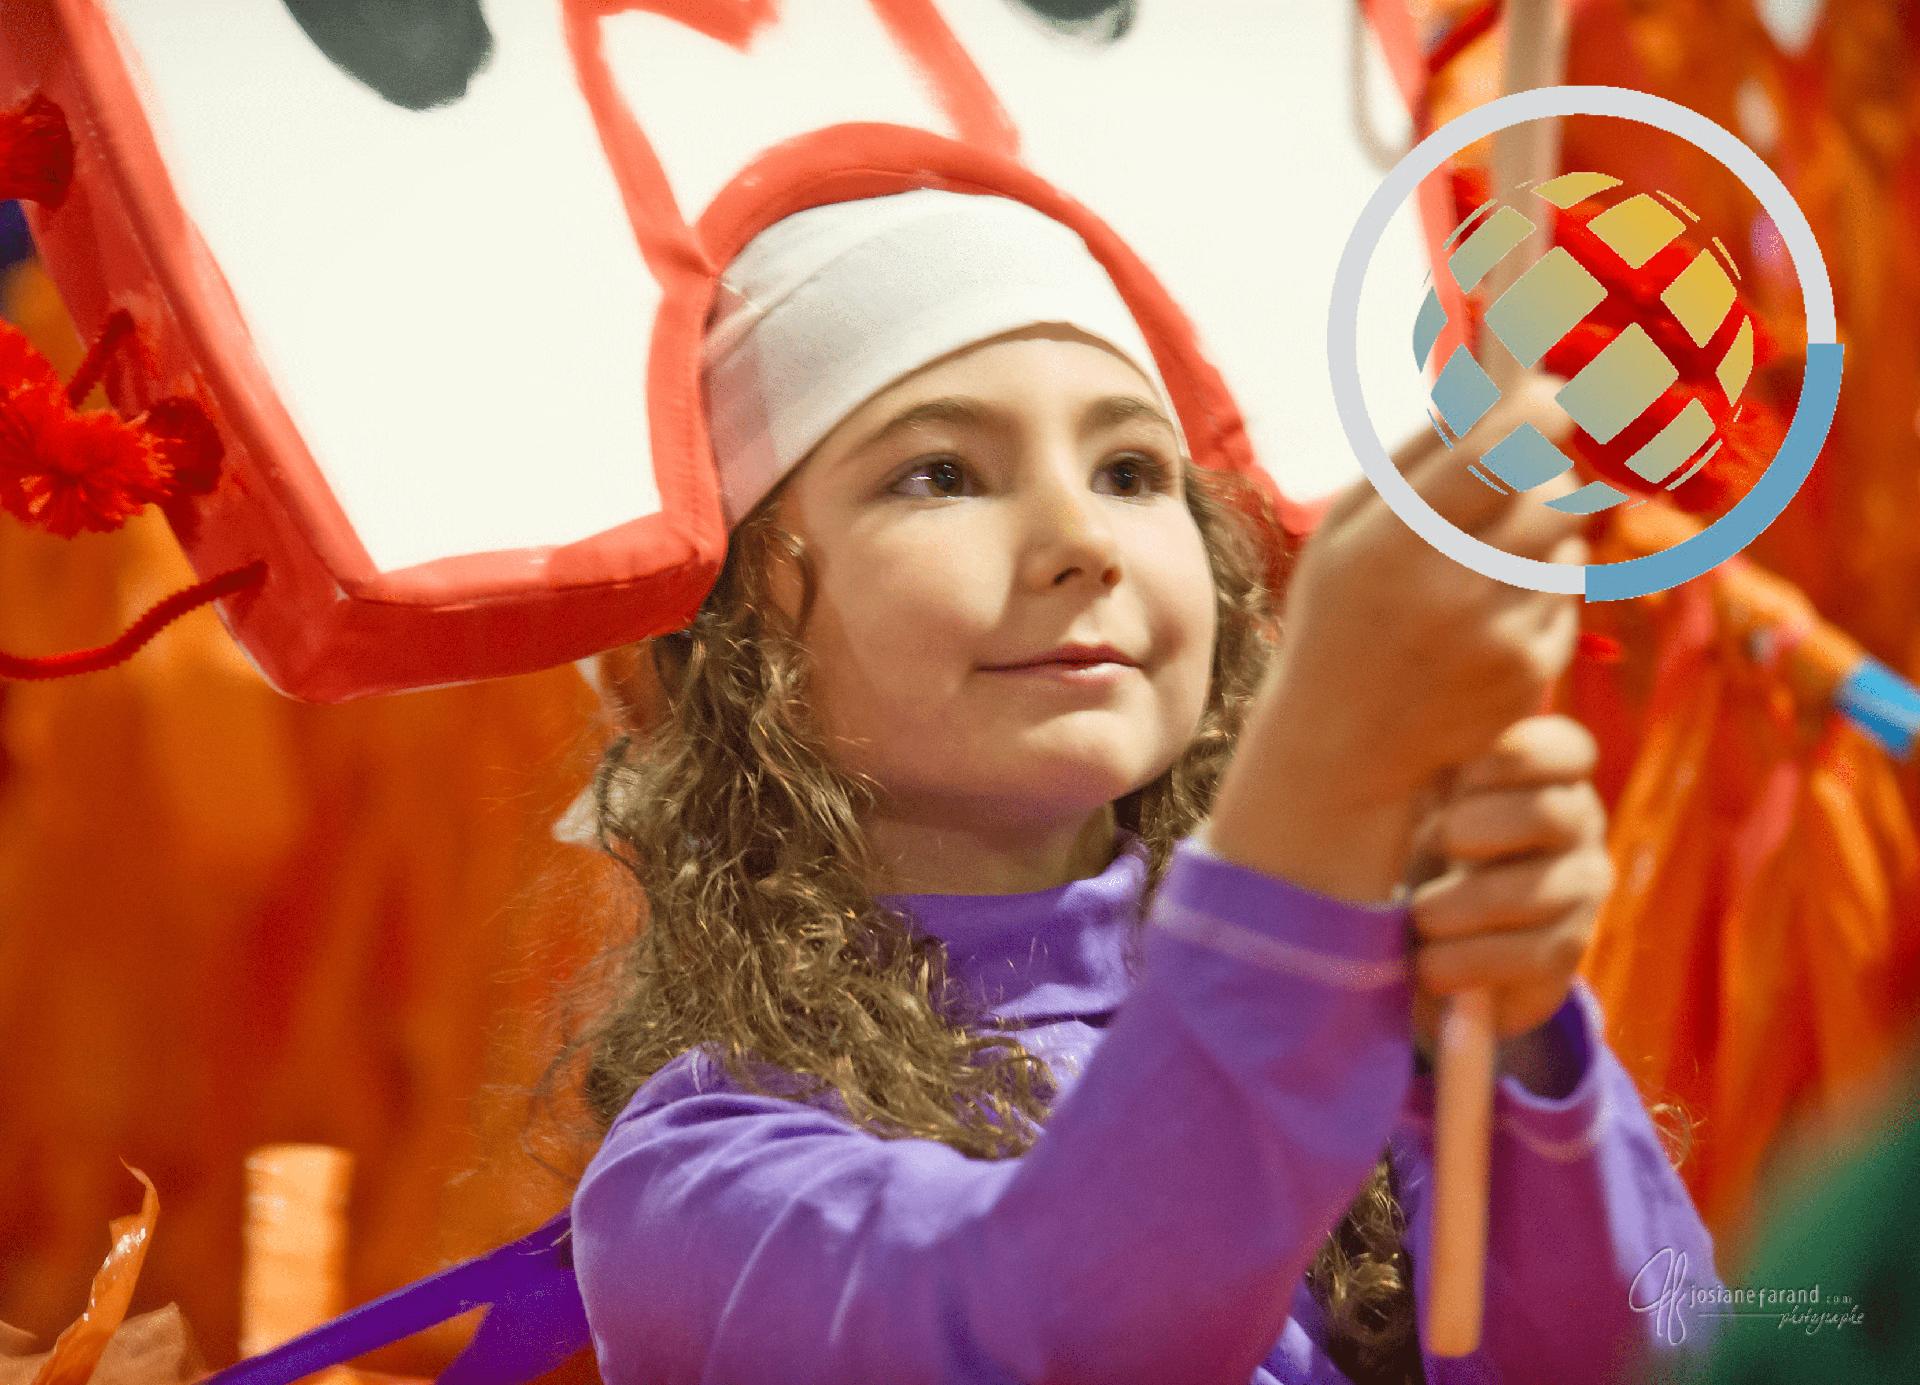 Vaudreuil-Dorion: Mosaic parade, a party as a tool for transforming the community